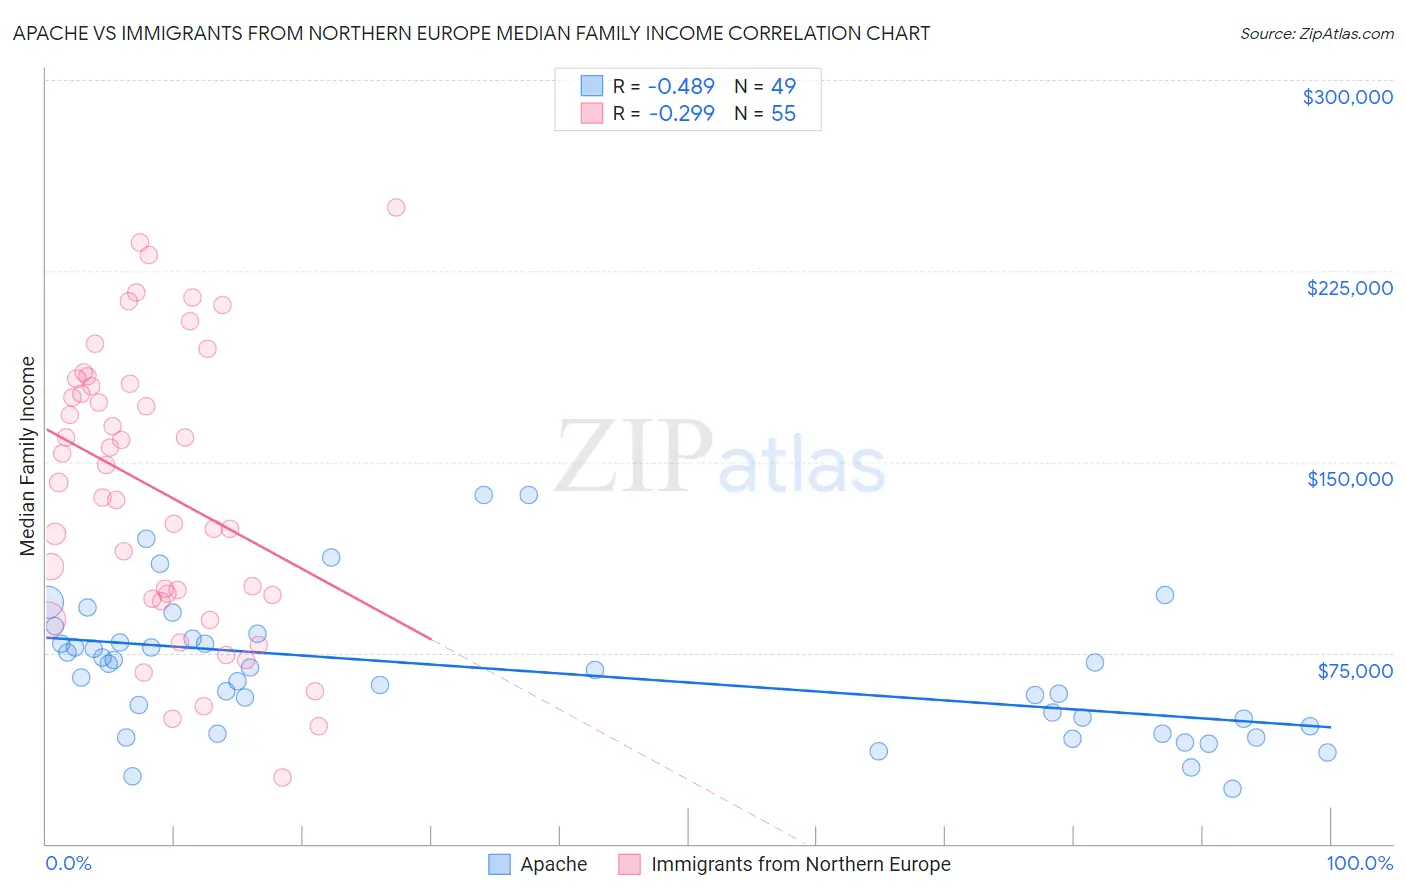 Apache vs Immigrants from Northern Europe Median Family Income